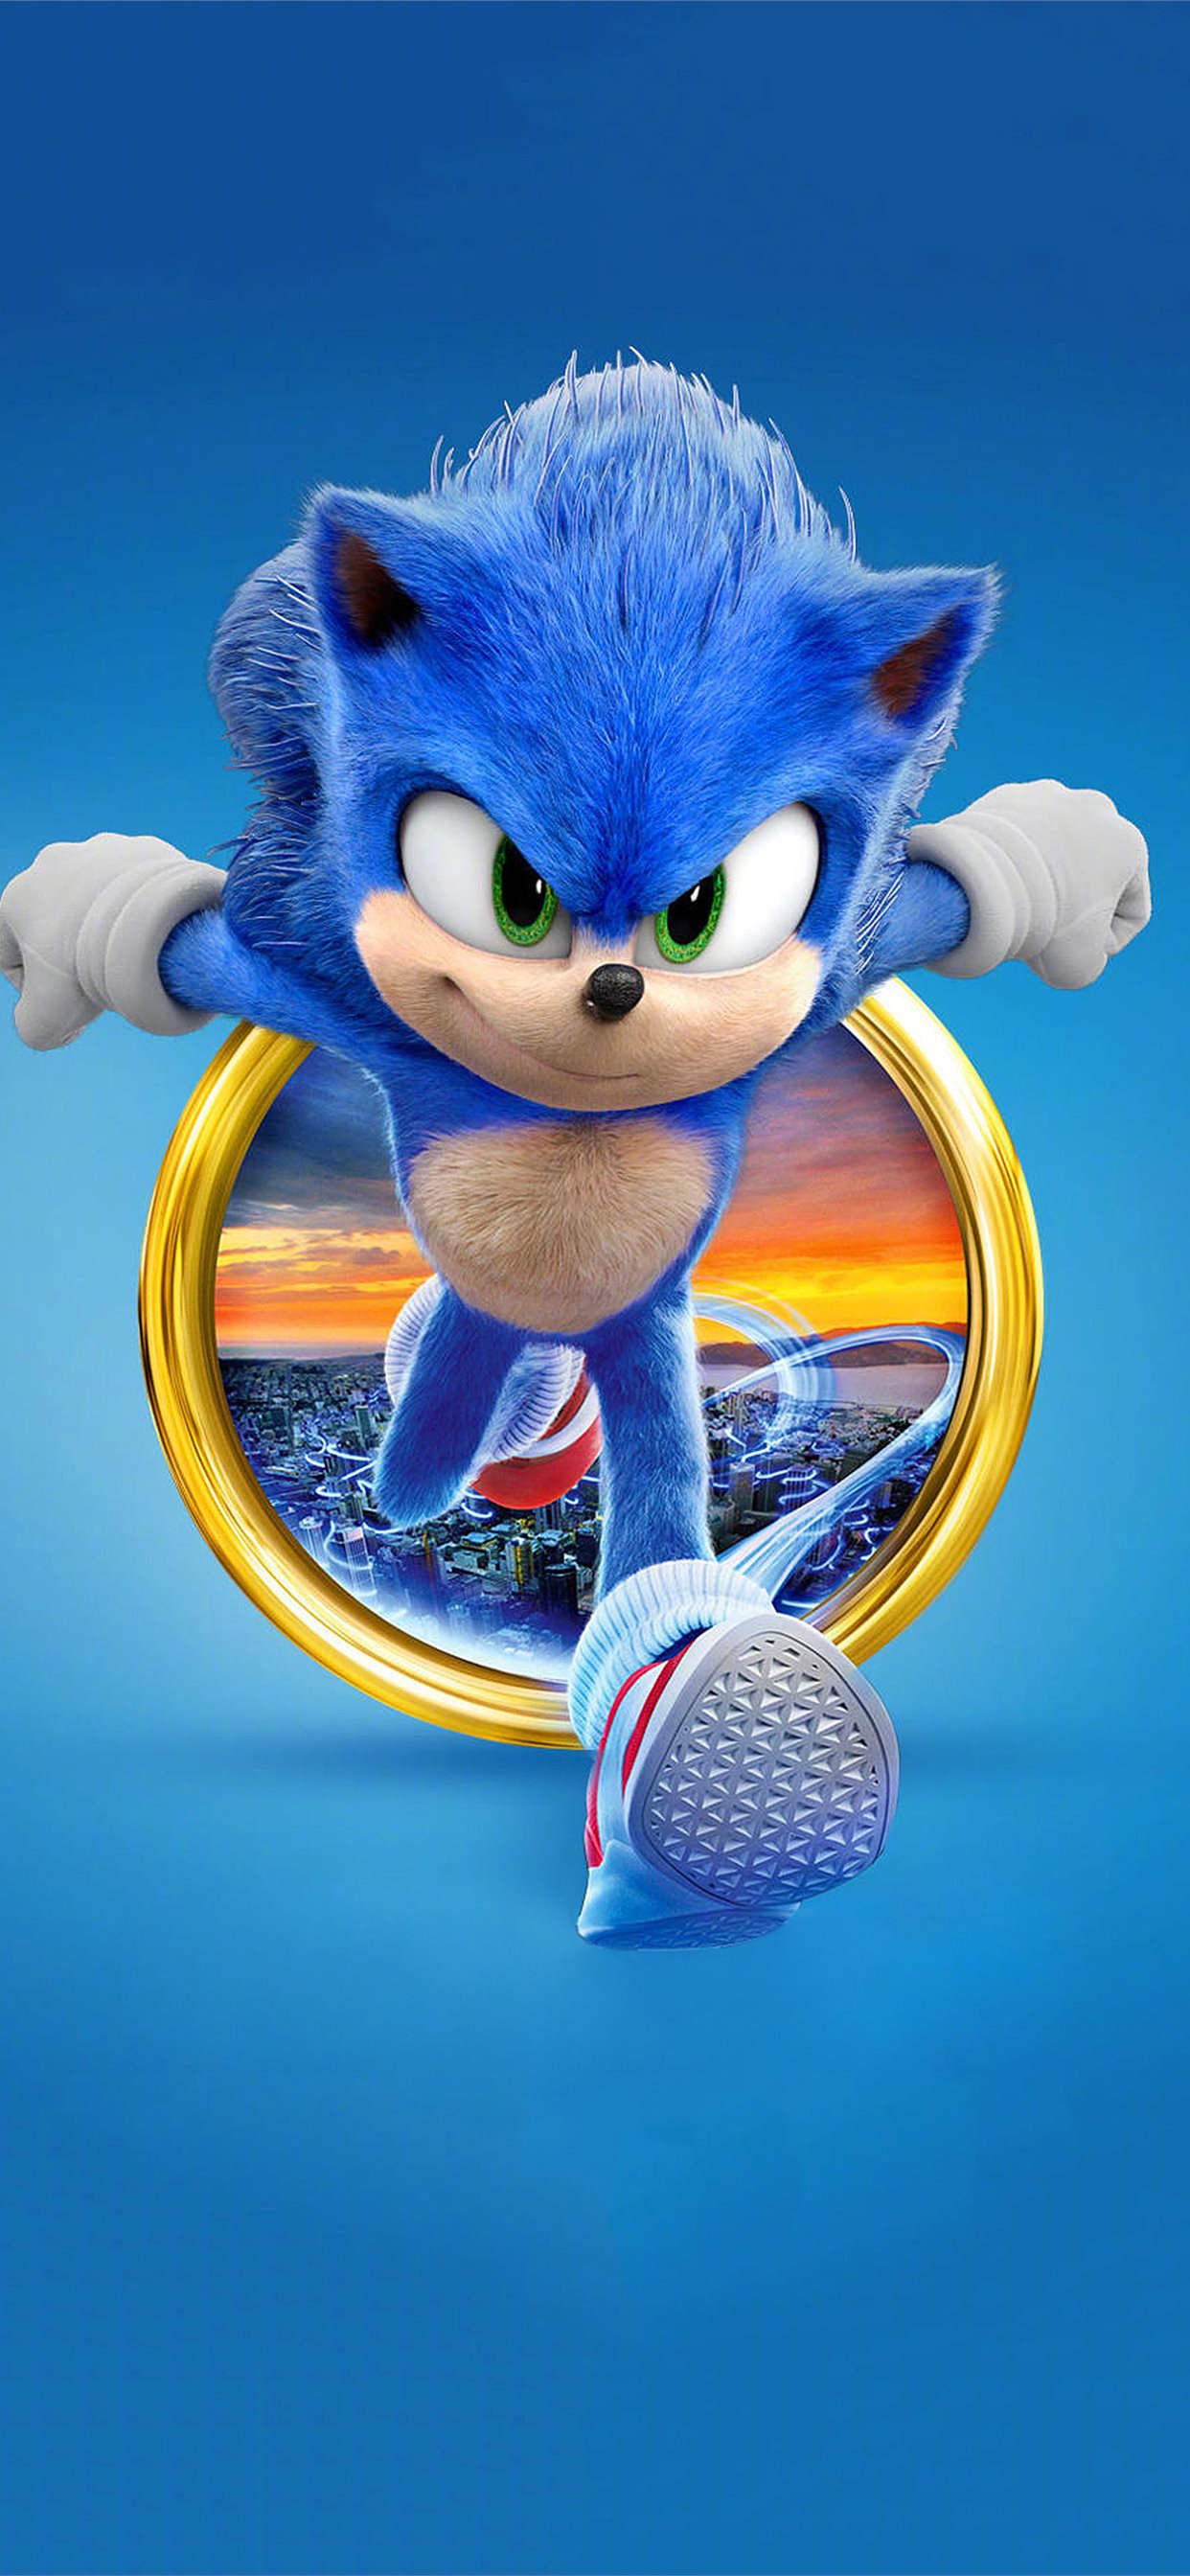 Sonic The Hedgehog 4k Iphone X Wallpapers Free Download